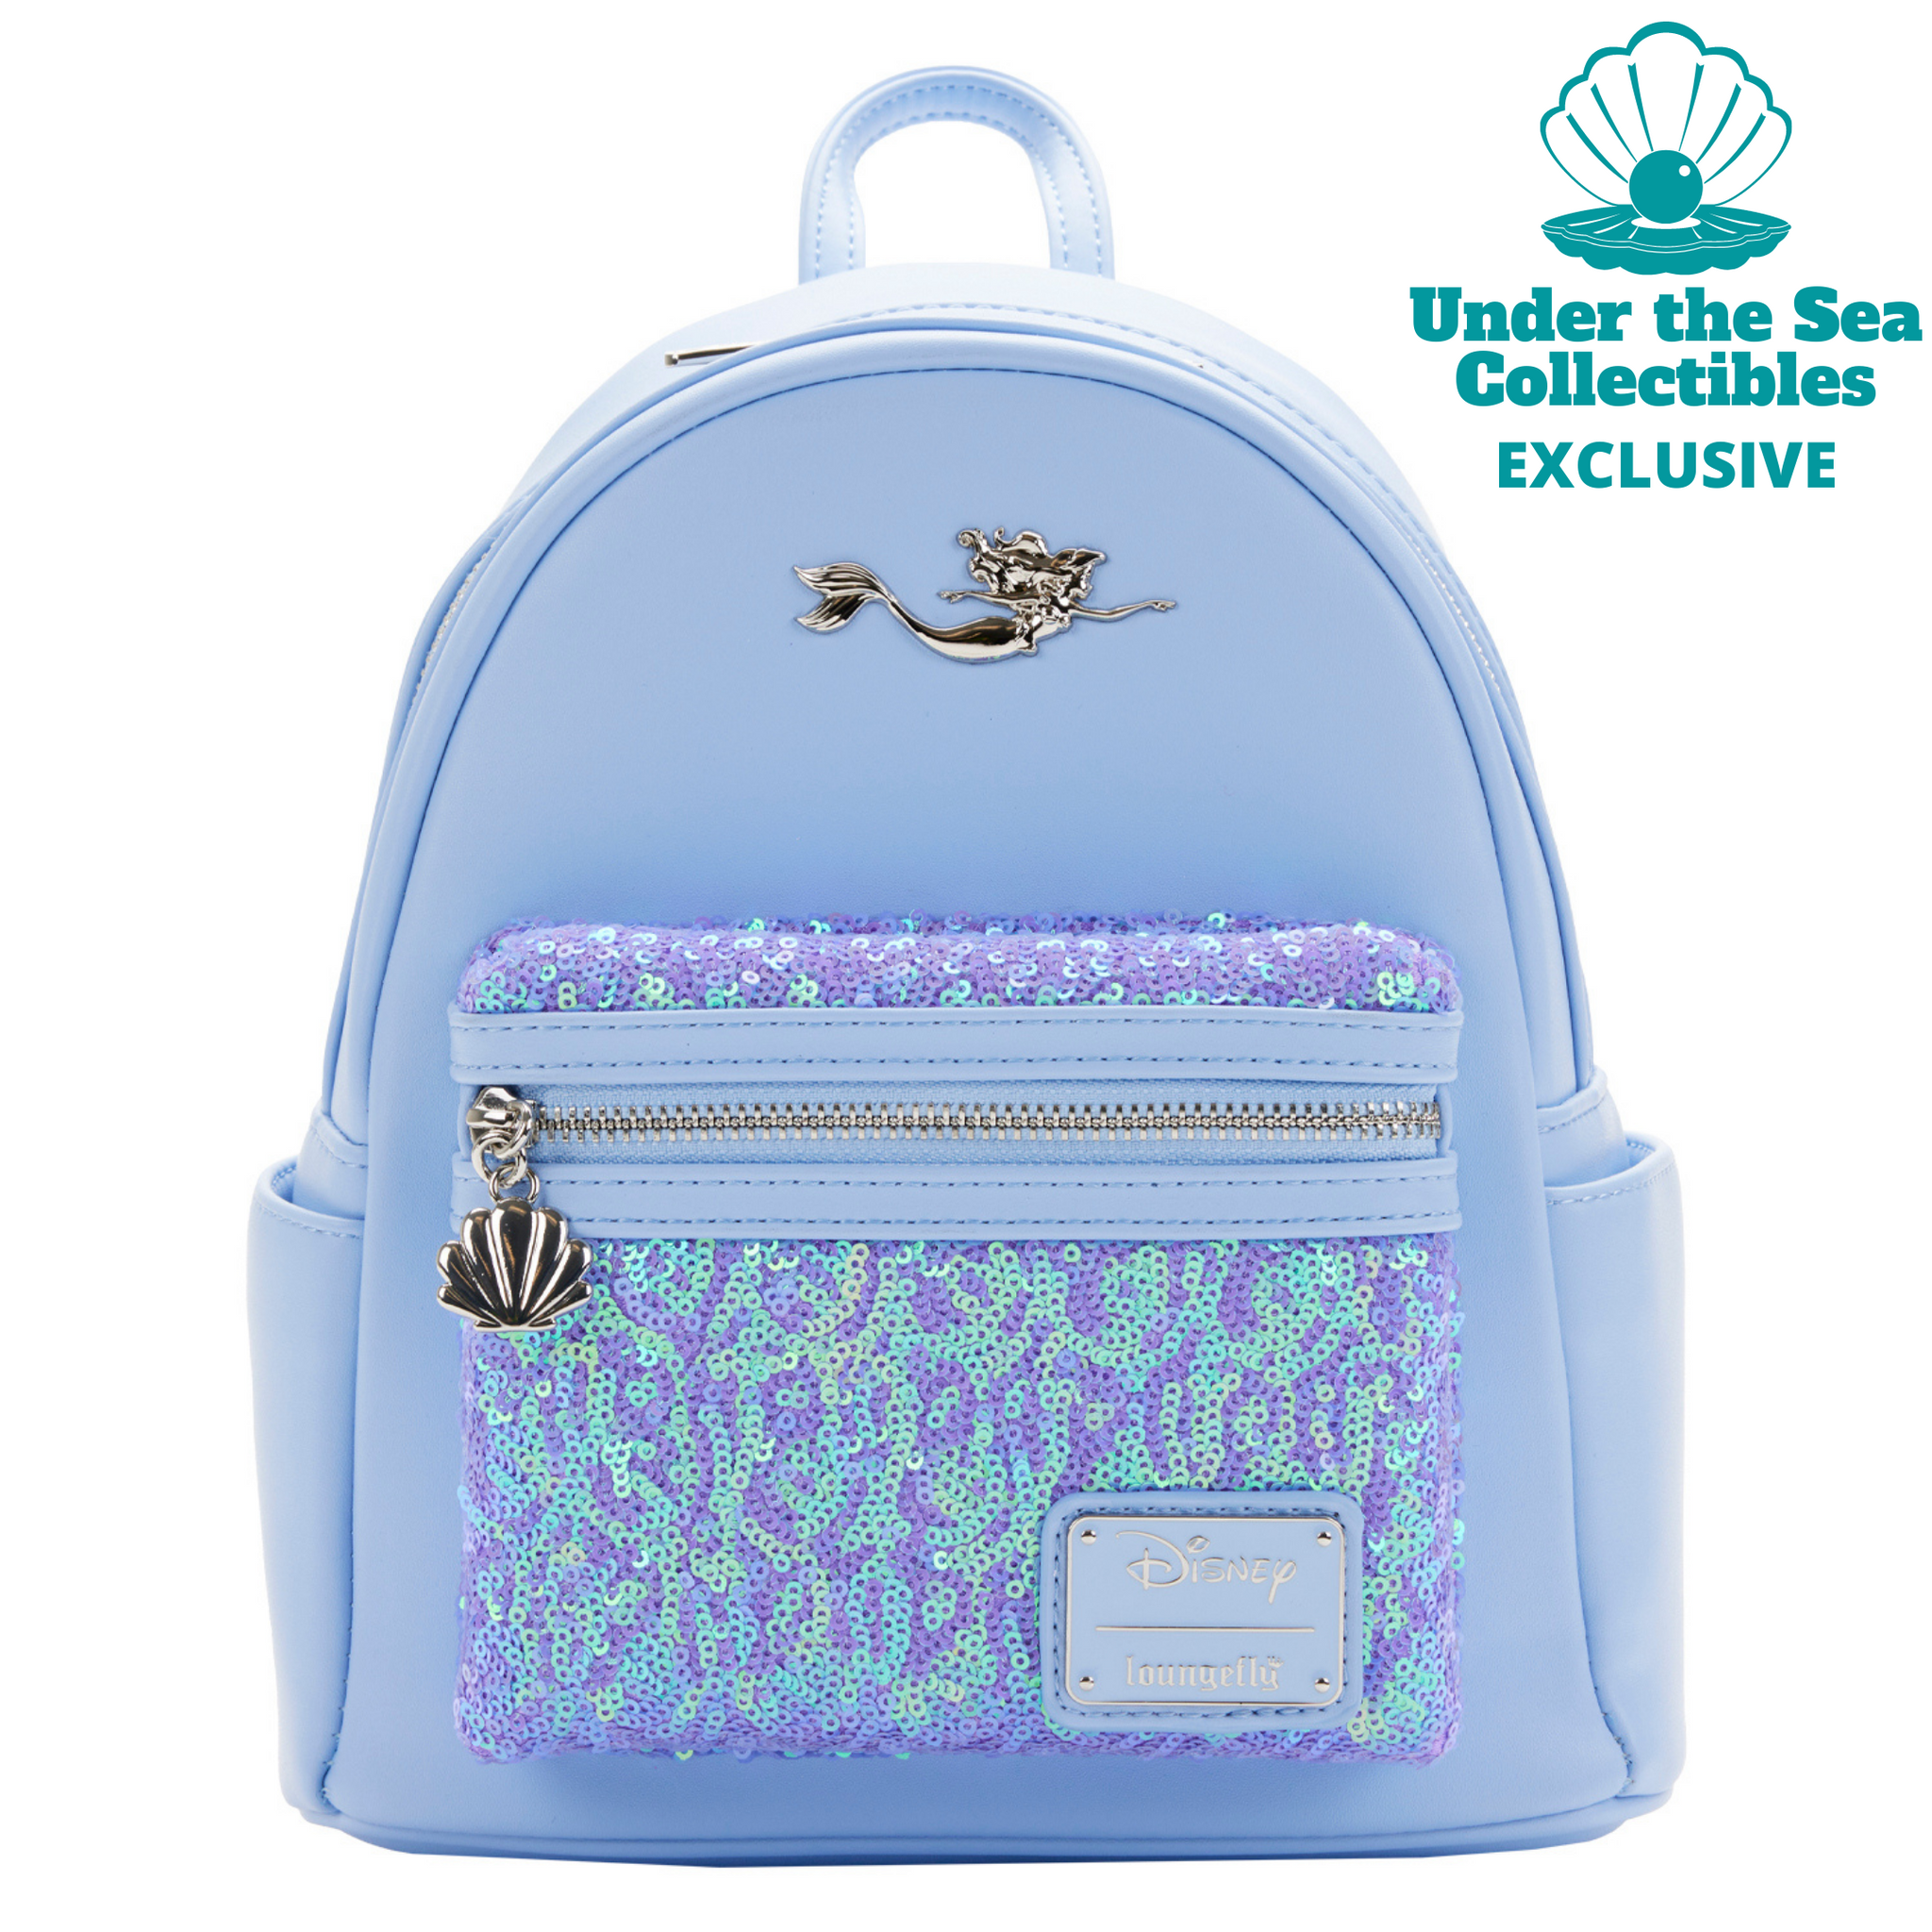 Little Mermaid Ariel Sequins Loungefly Mini Backpack (Under the Sea Co – Under the Collectibles